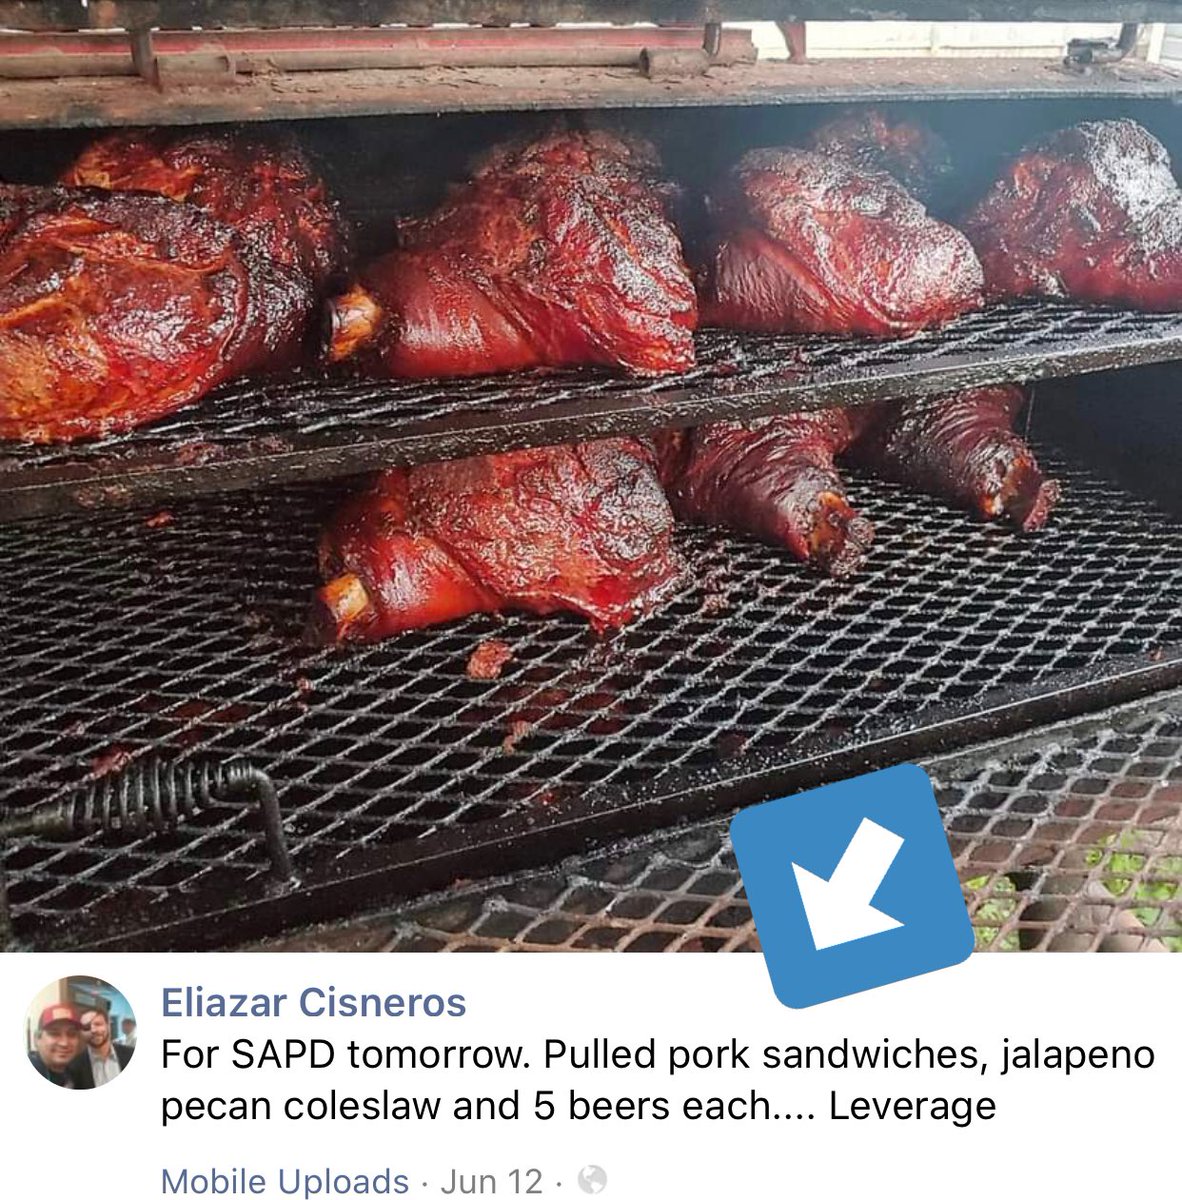 Trump supporter Eliazar Cisneros likes to donate food to cops which he calls “leverage.”Looks like Eliazar expects unjust favors in return when he served the San Antonio Police Department back in July.